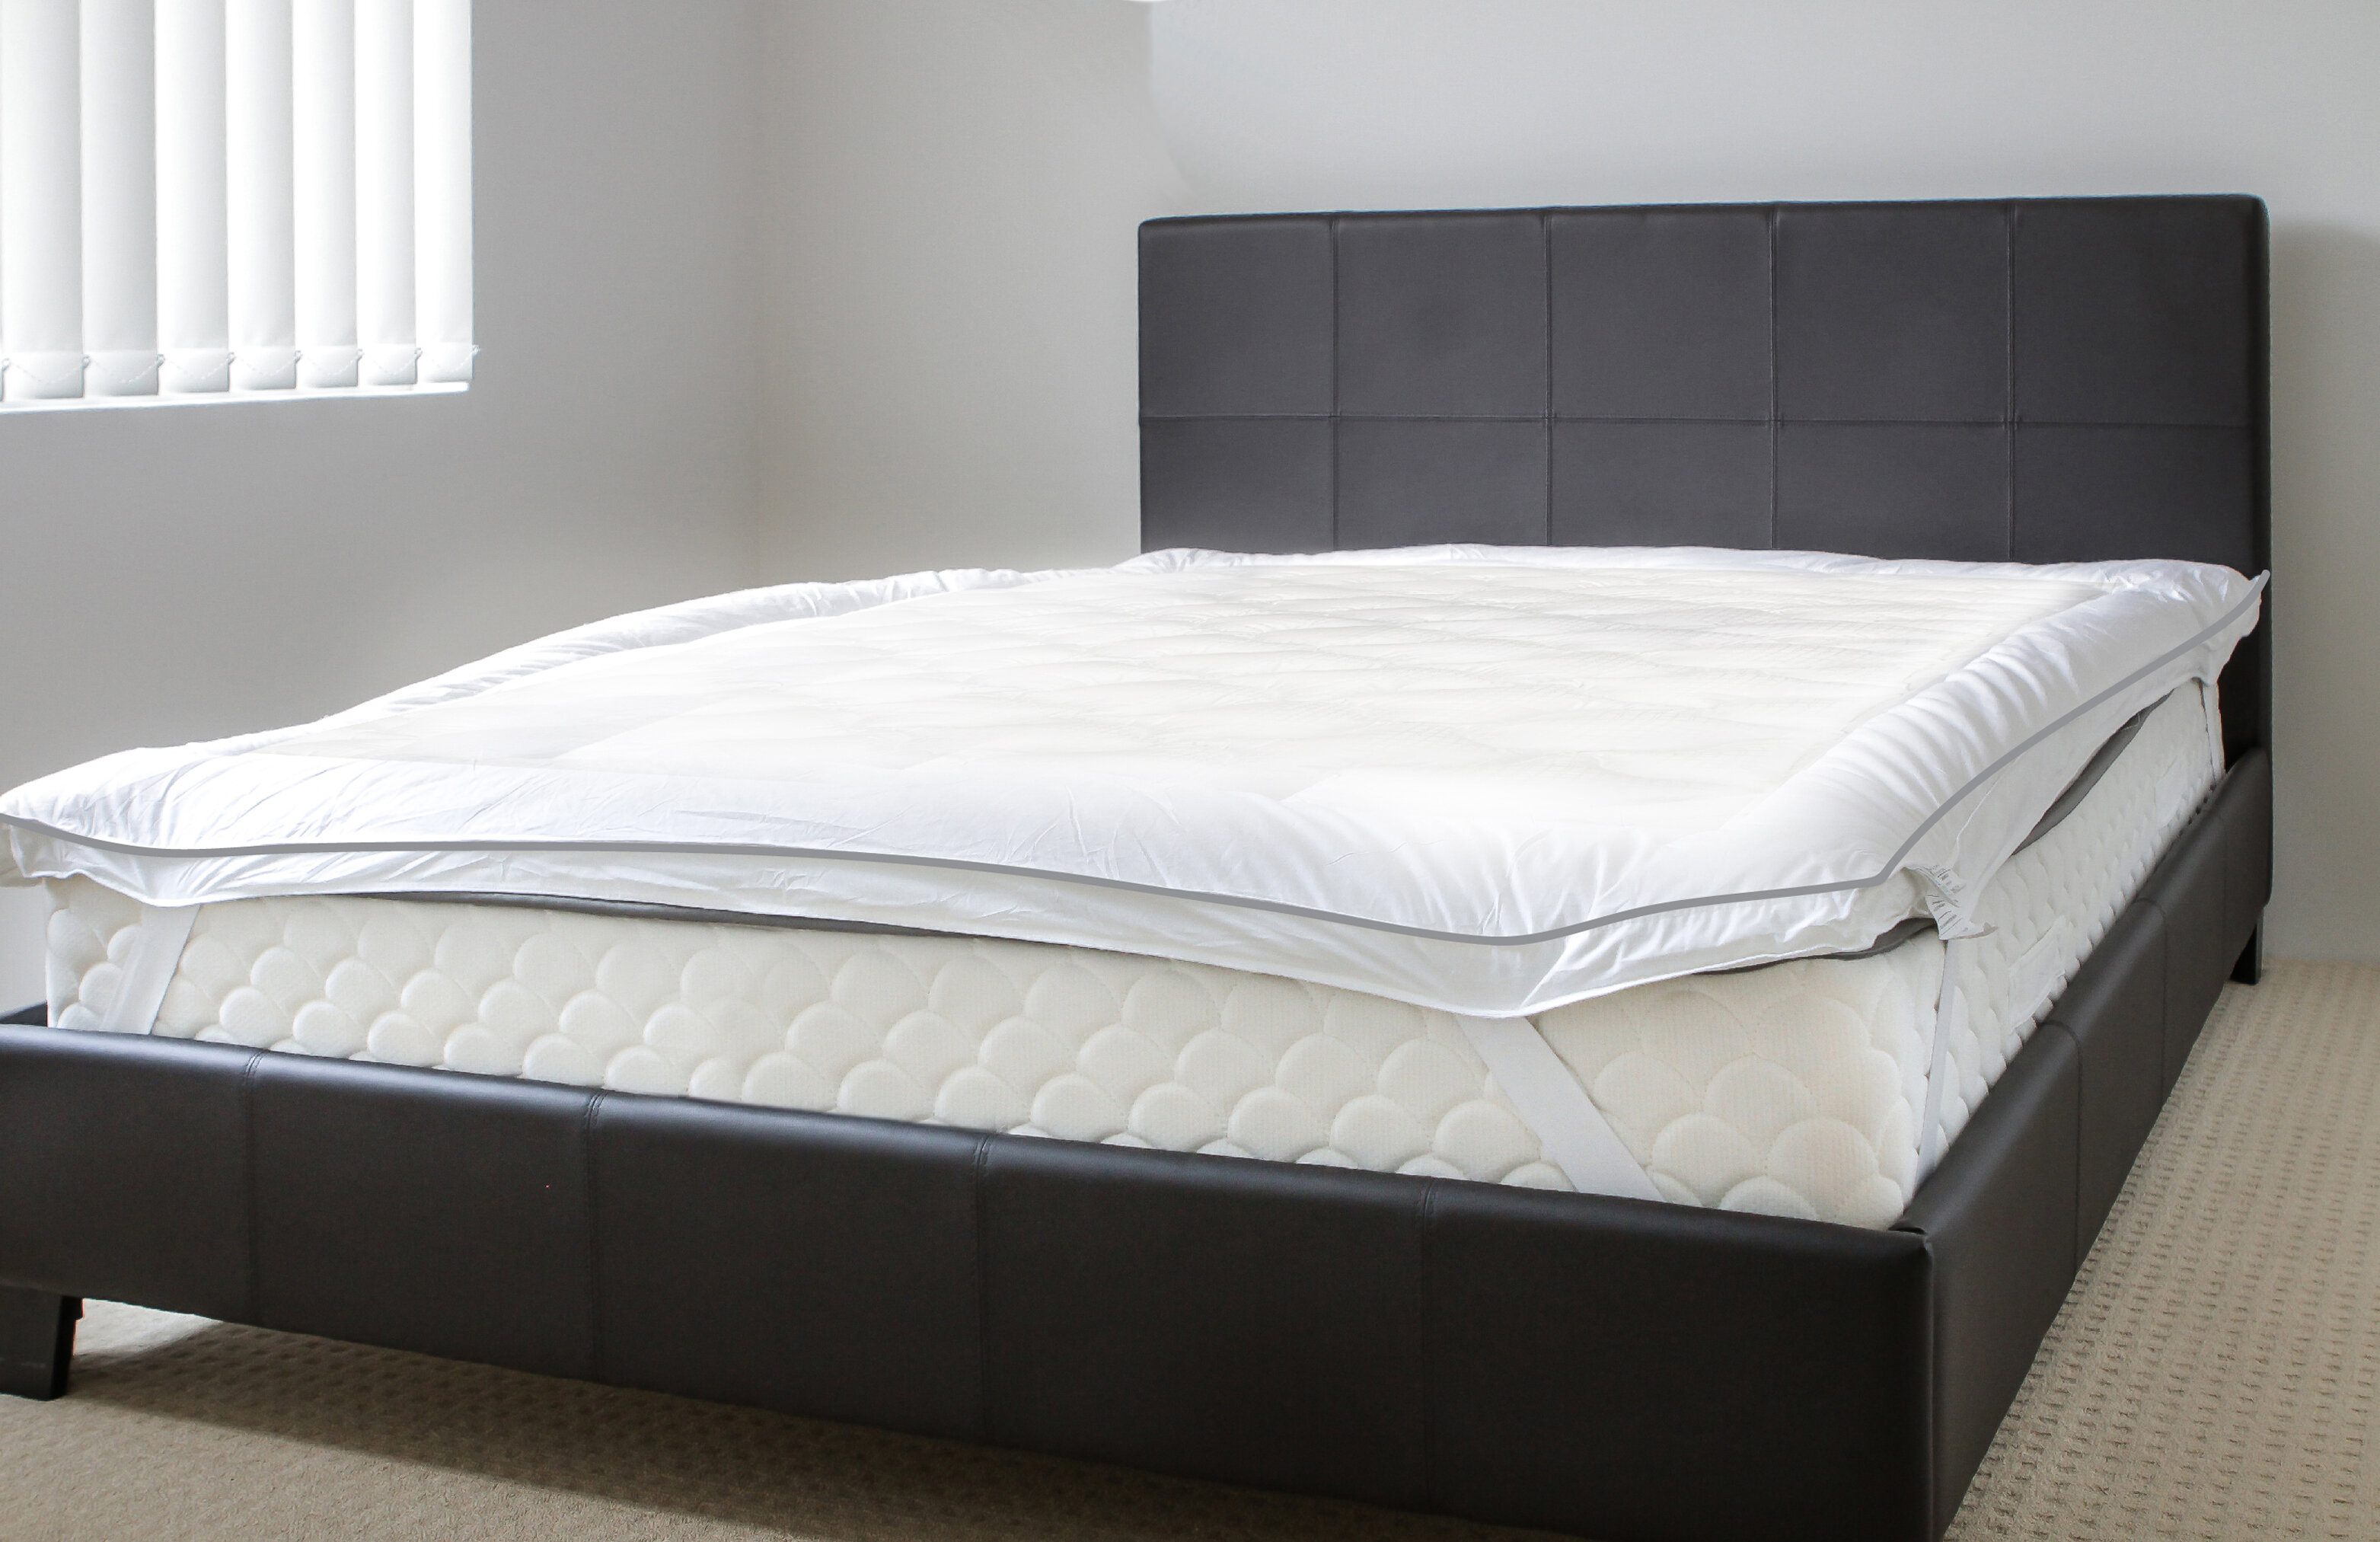 forty winks newington essential double mattress review